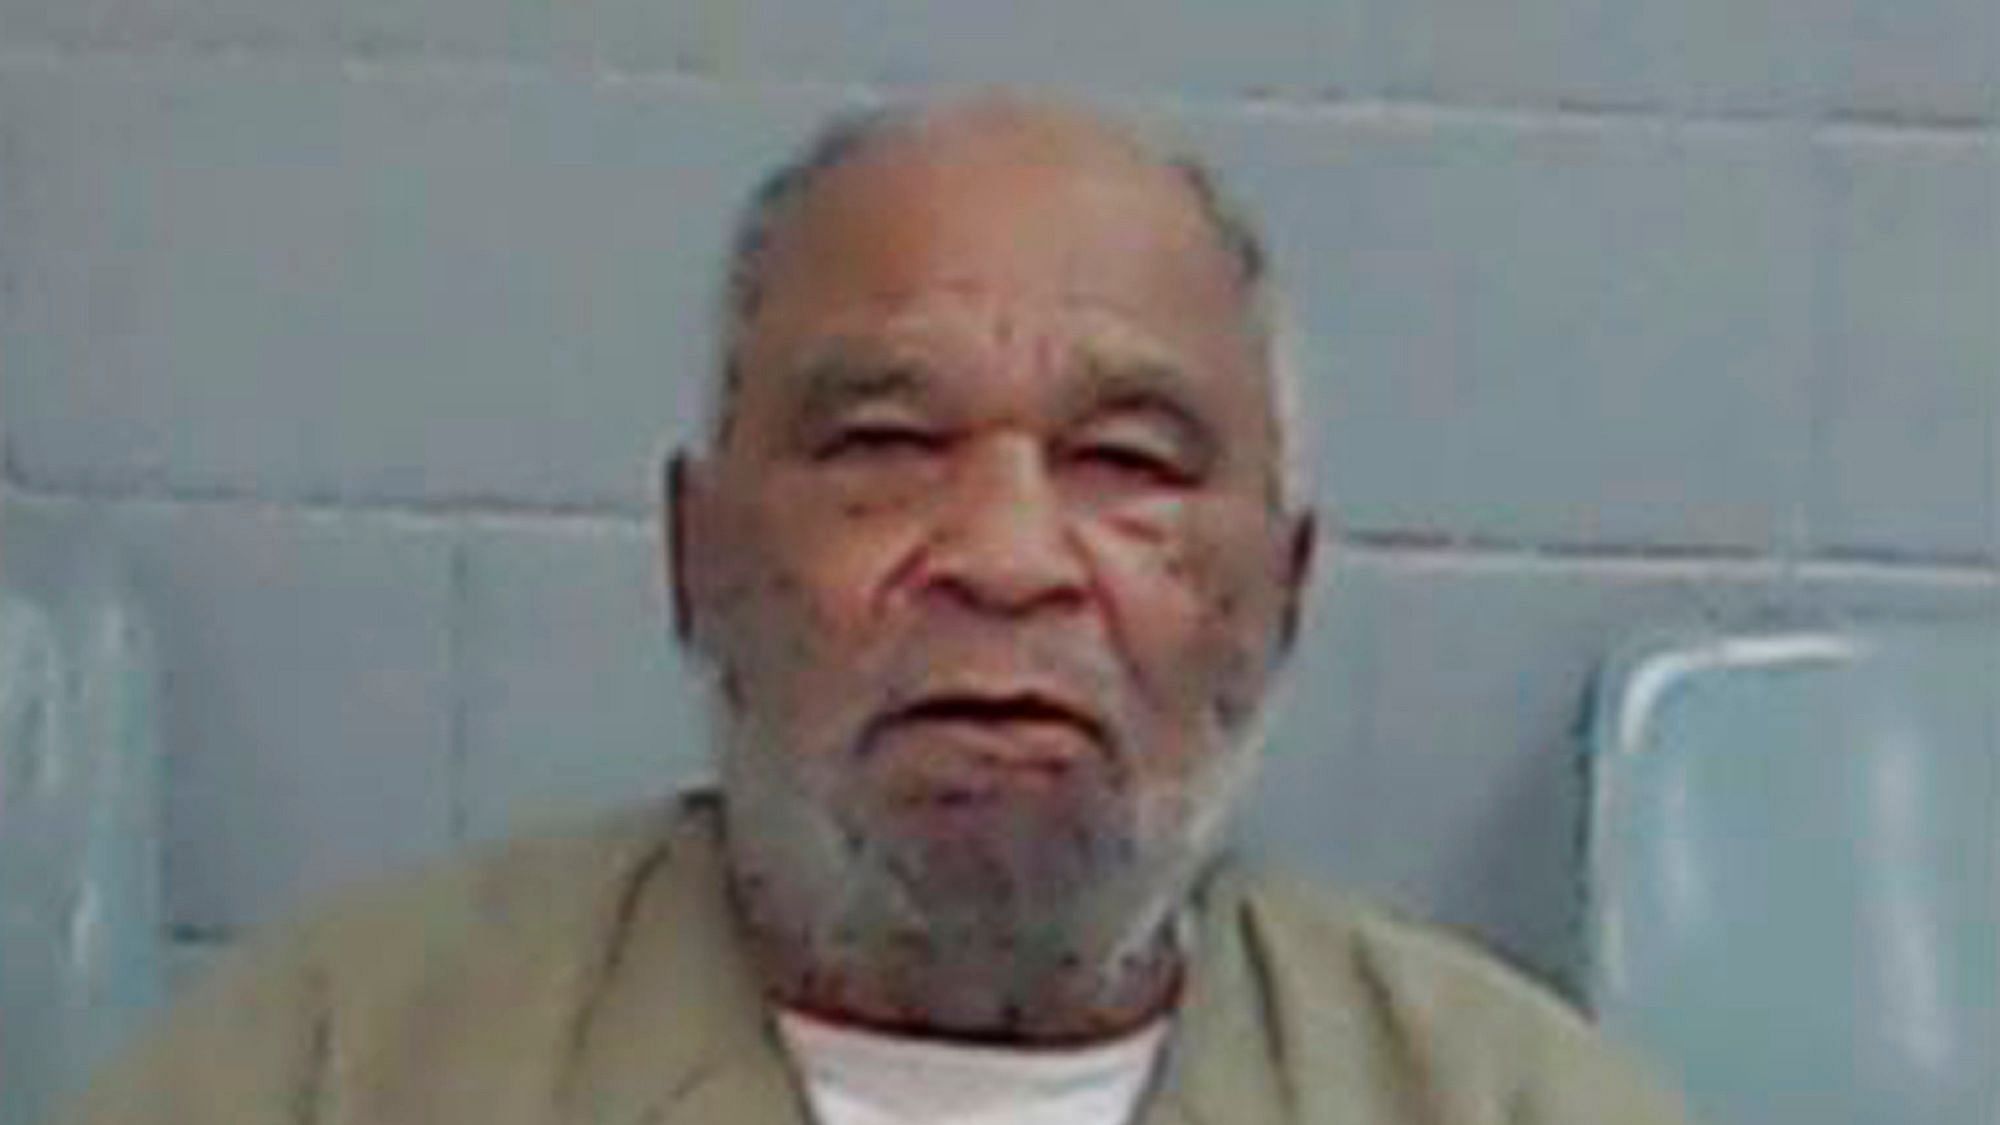 This undated photo provided by the Ector County Texas Sheriff’s Office shows Samuel Little. &nbsp;